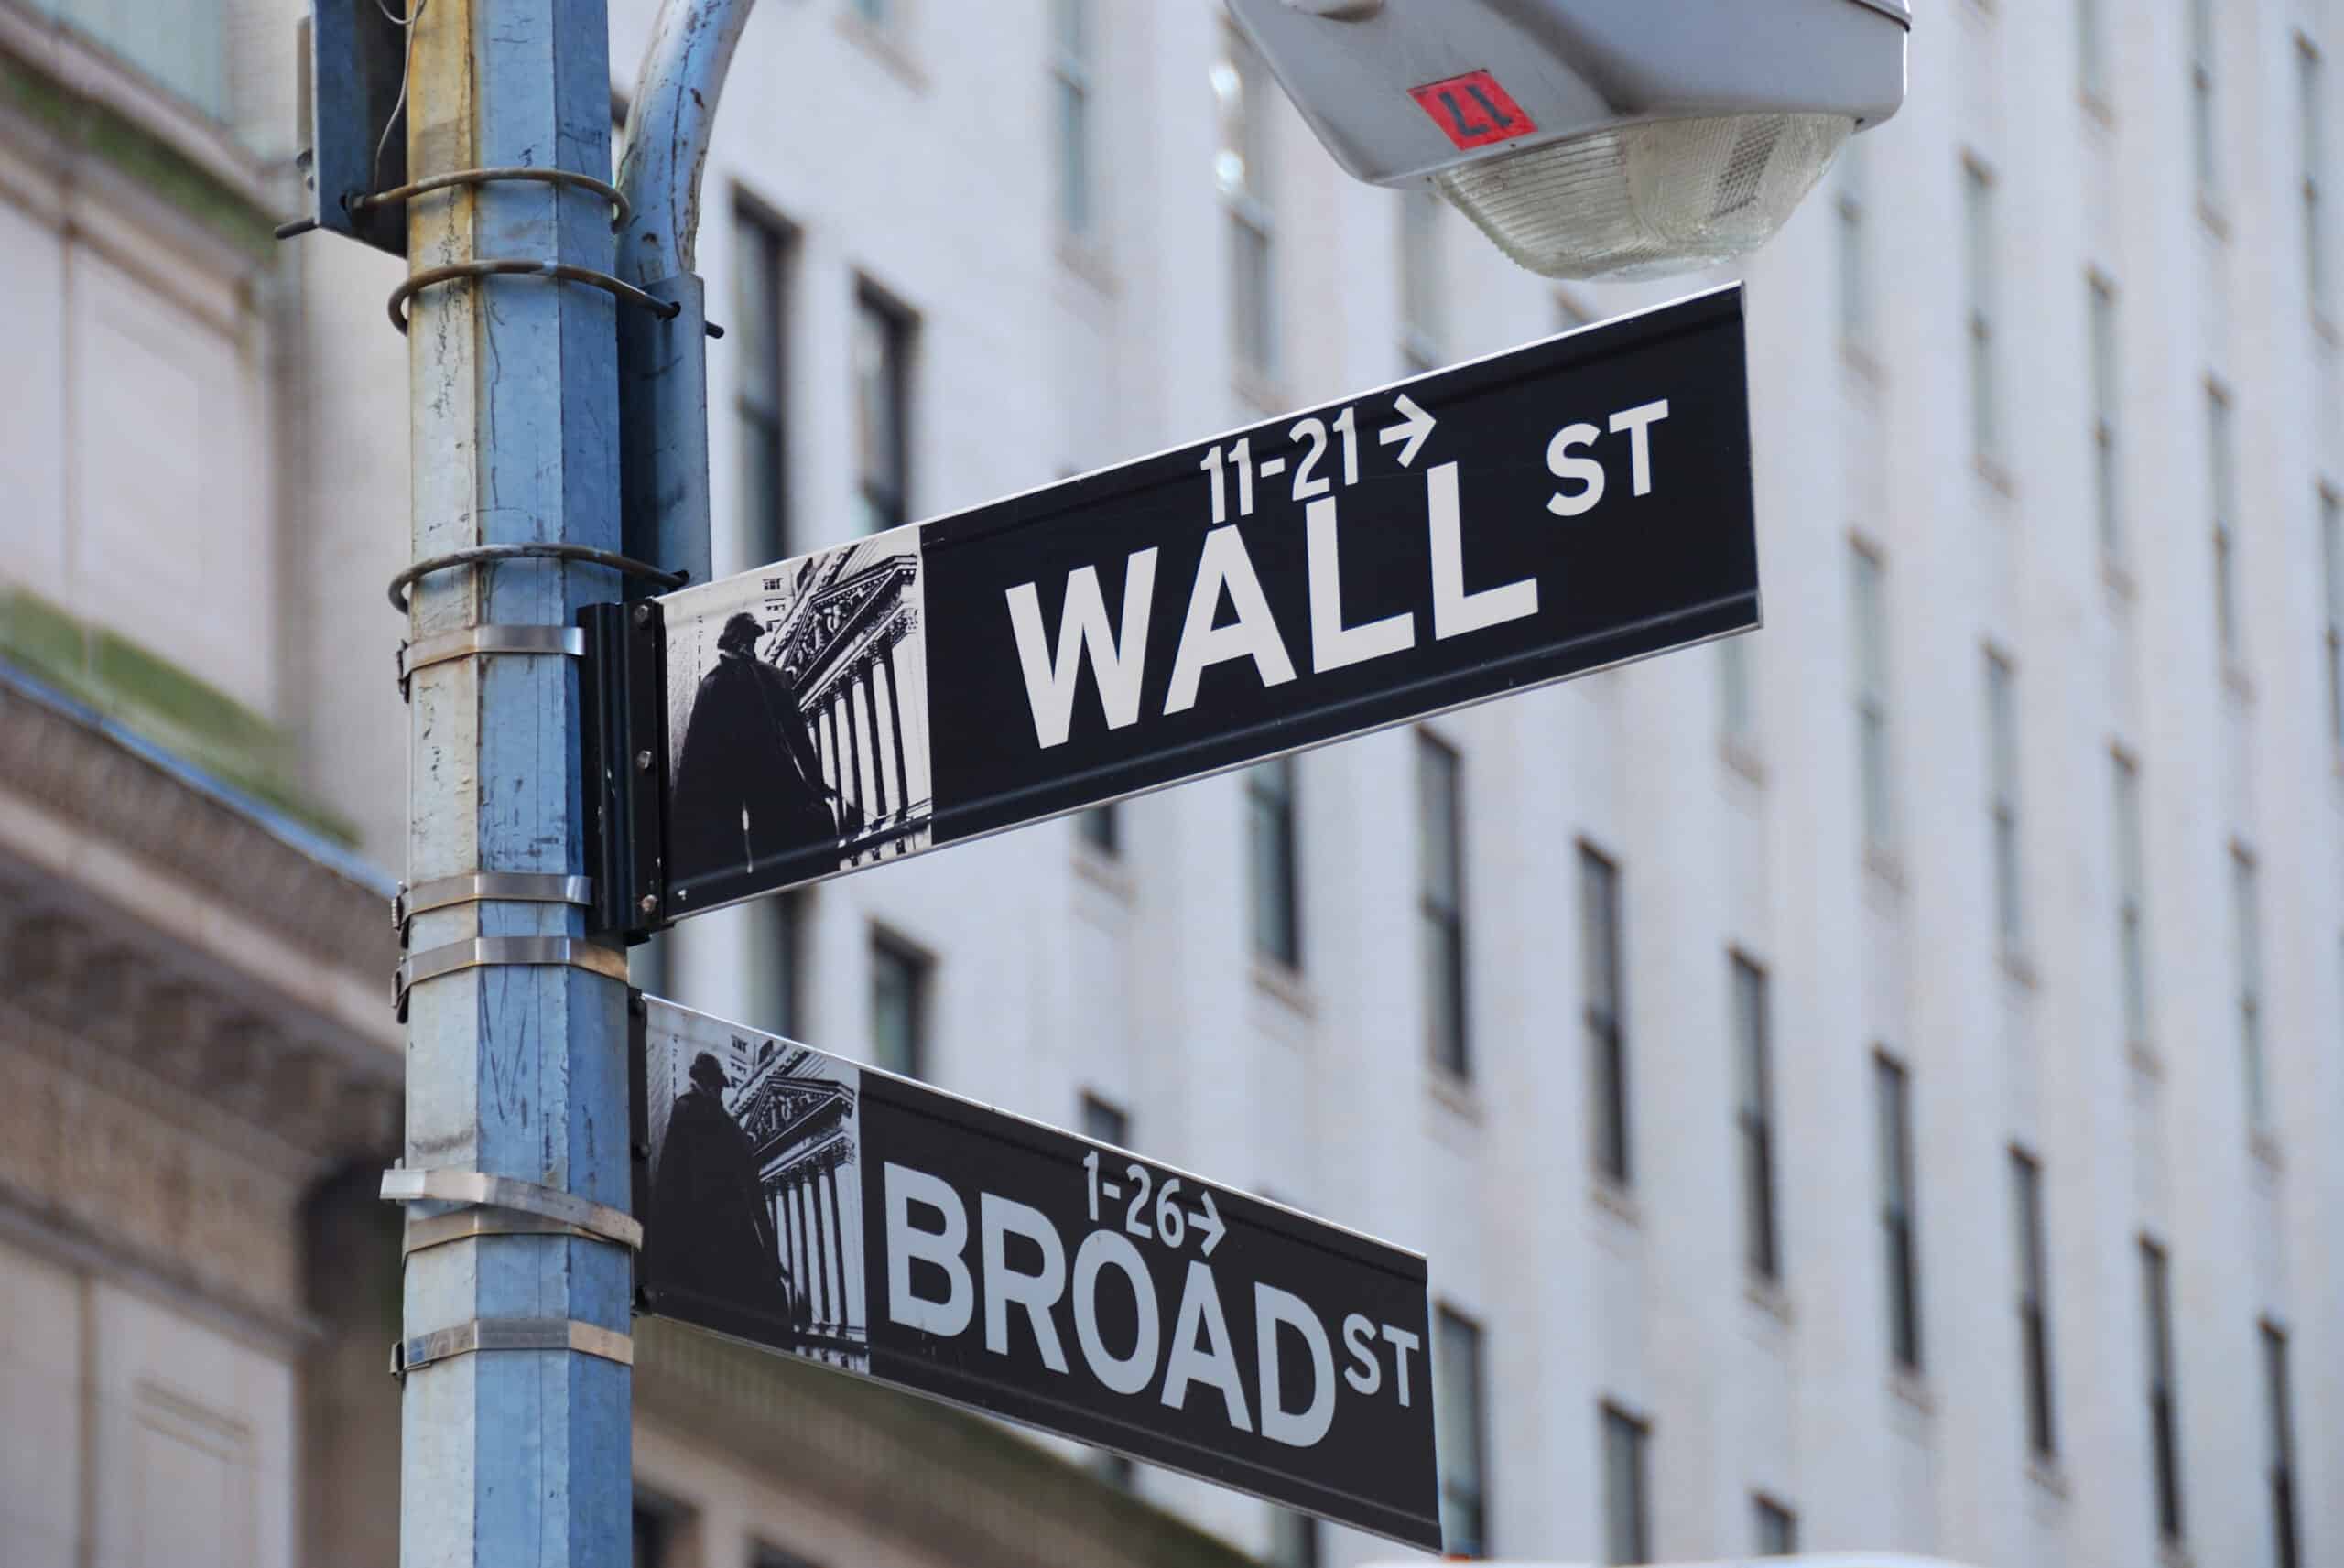 Wall street street sign in New York city